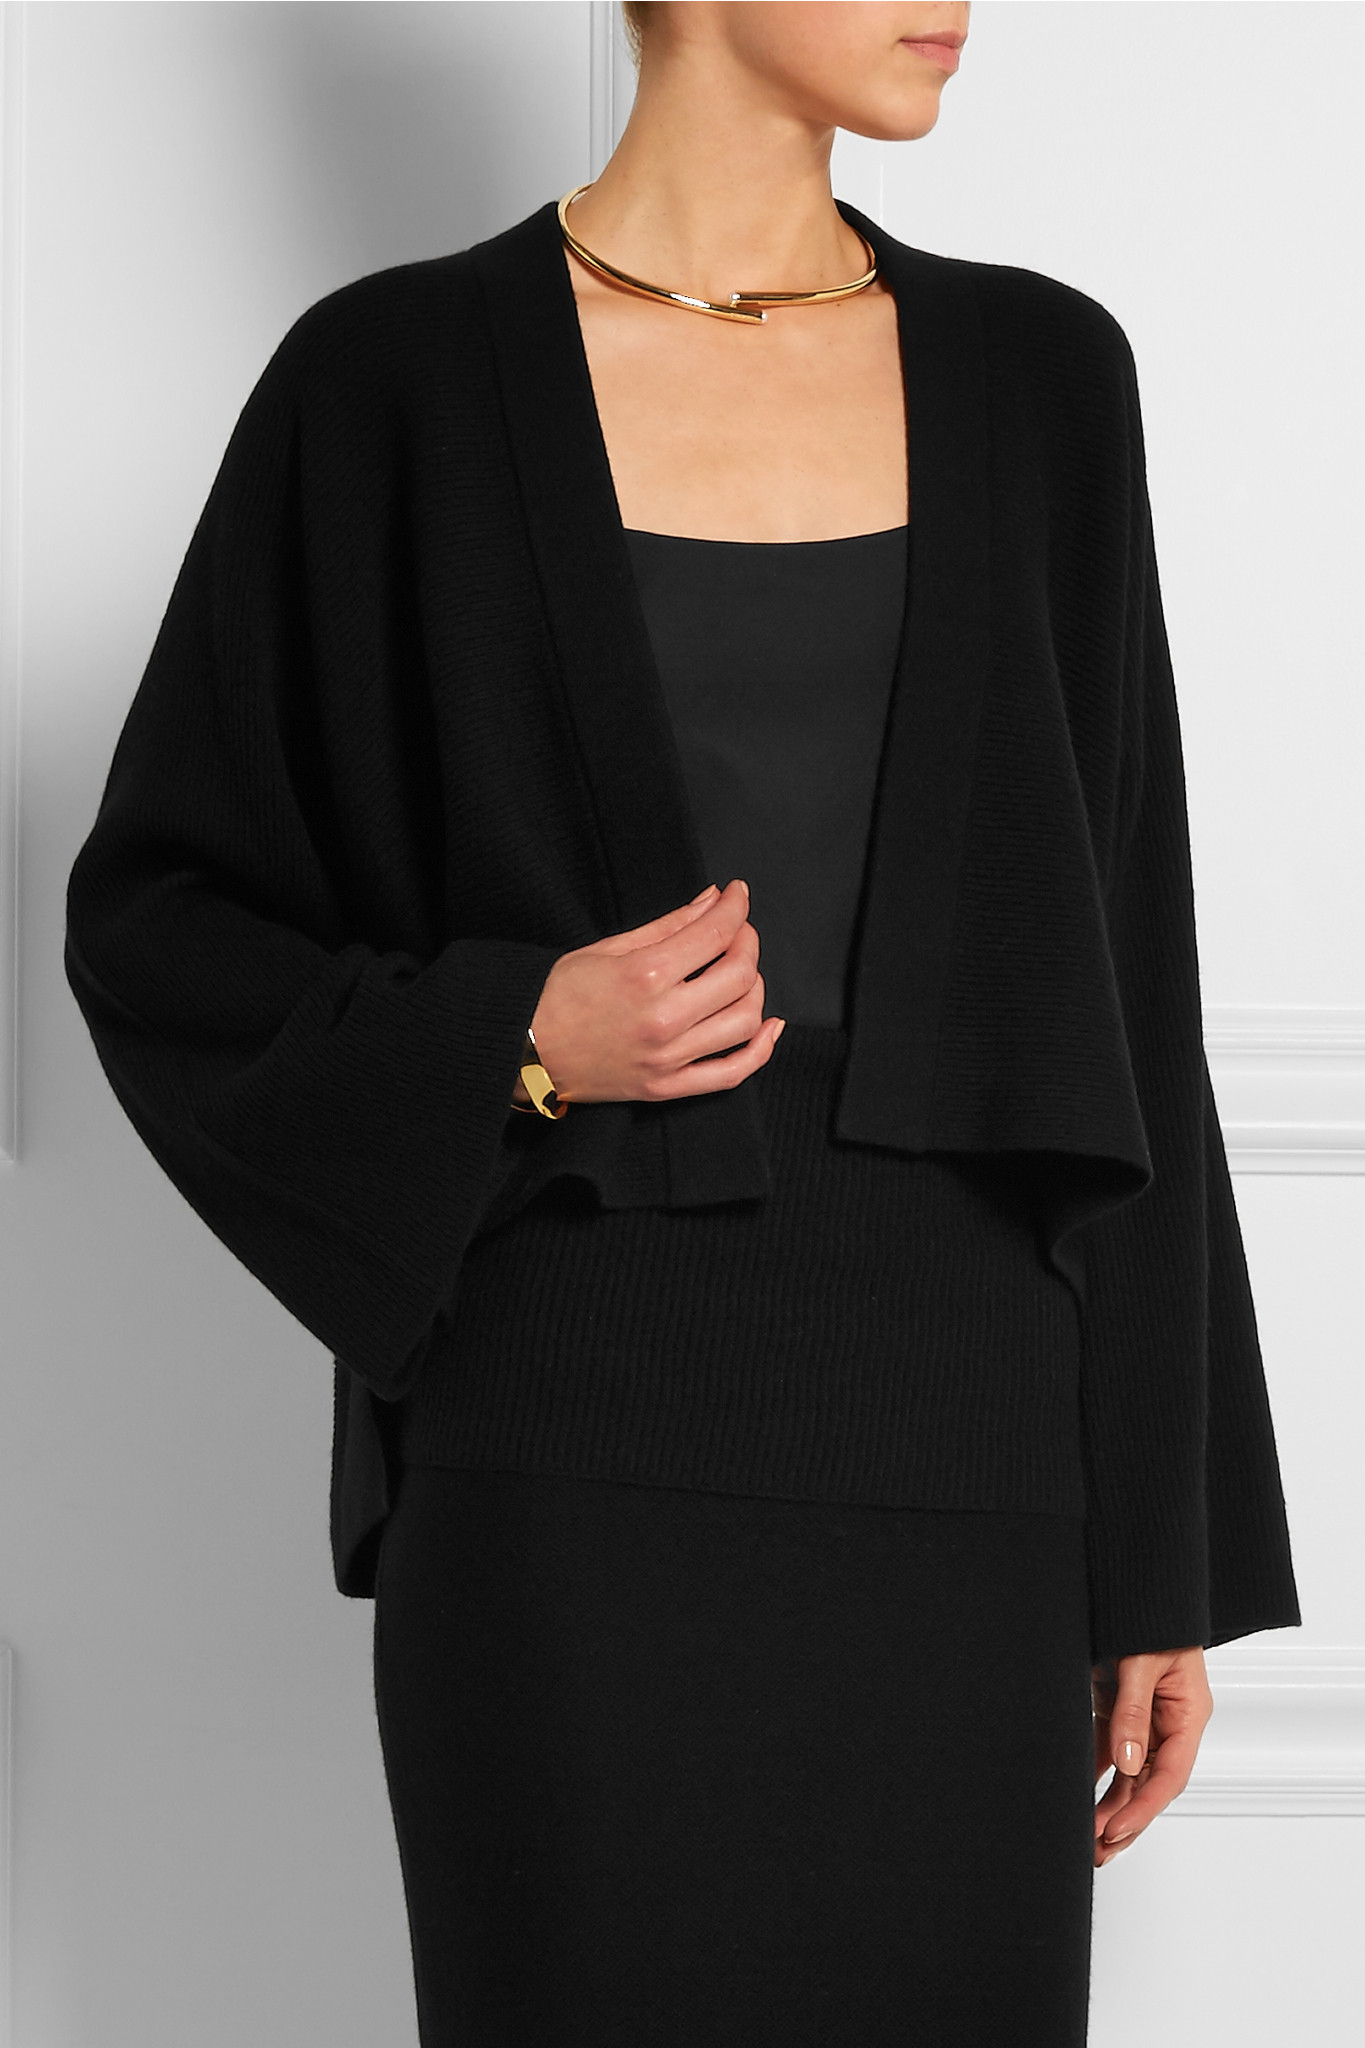 Donna Karan Cropped Ribbed Cashmere Cardigan in Black - Lyst